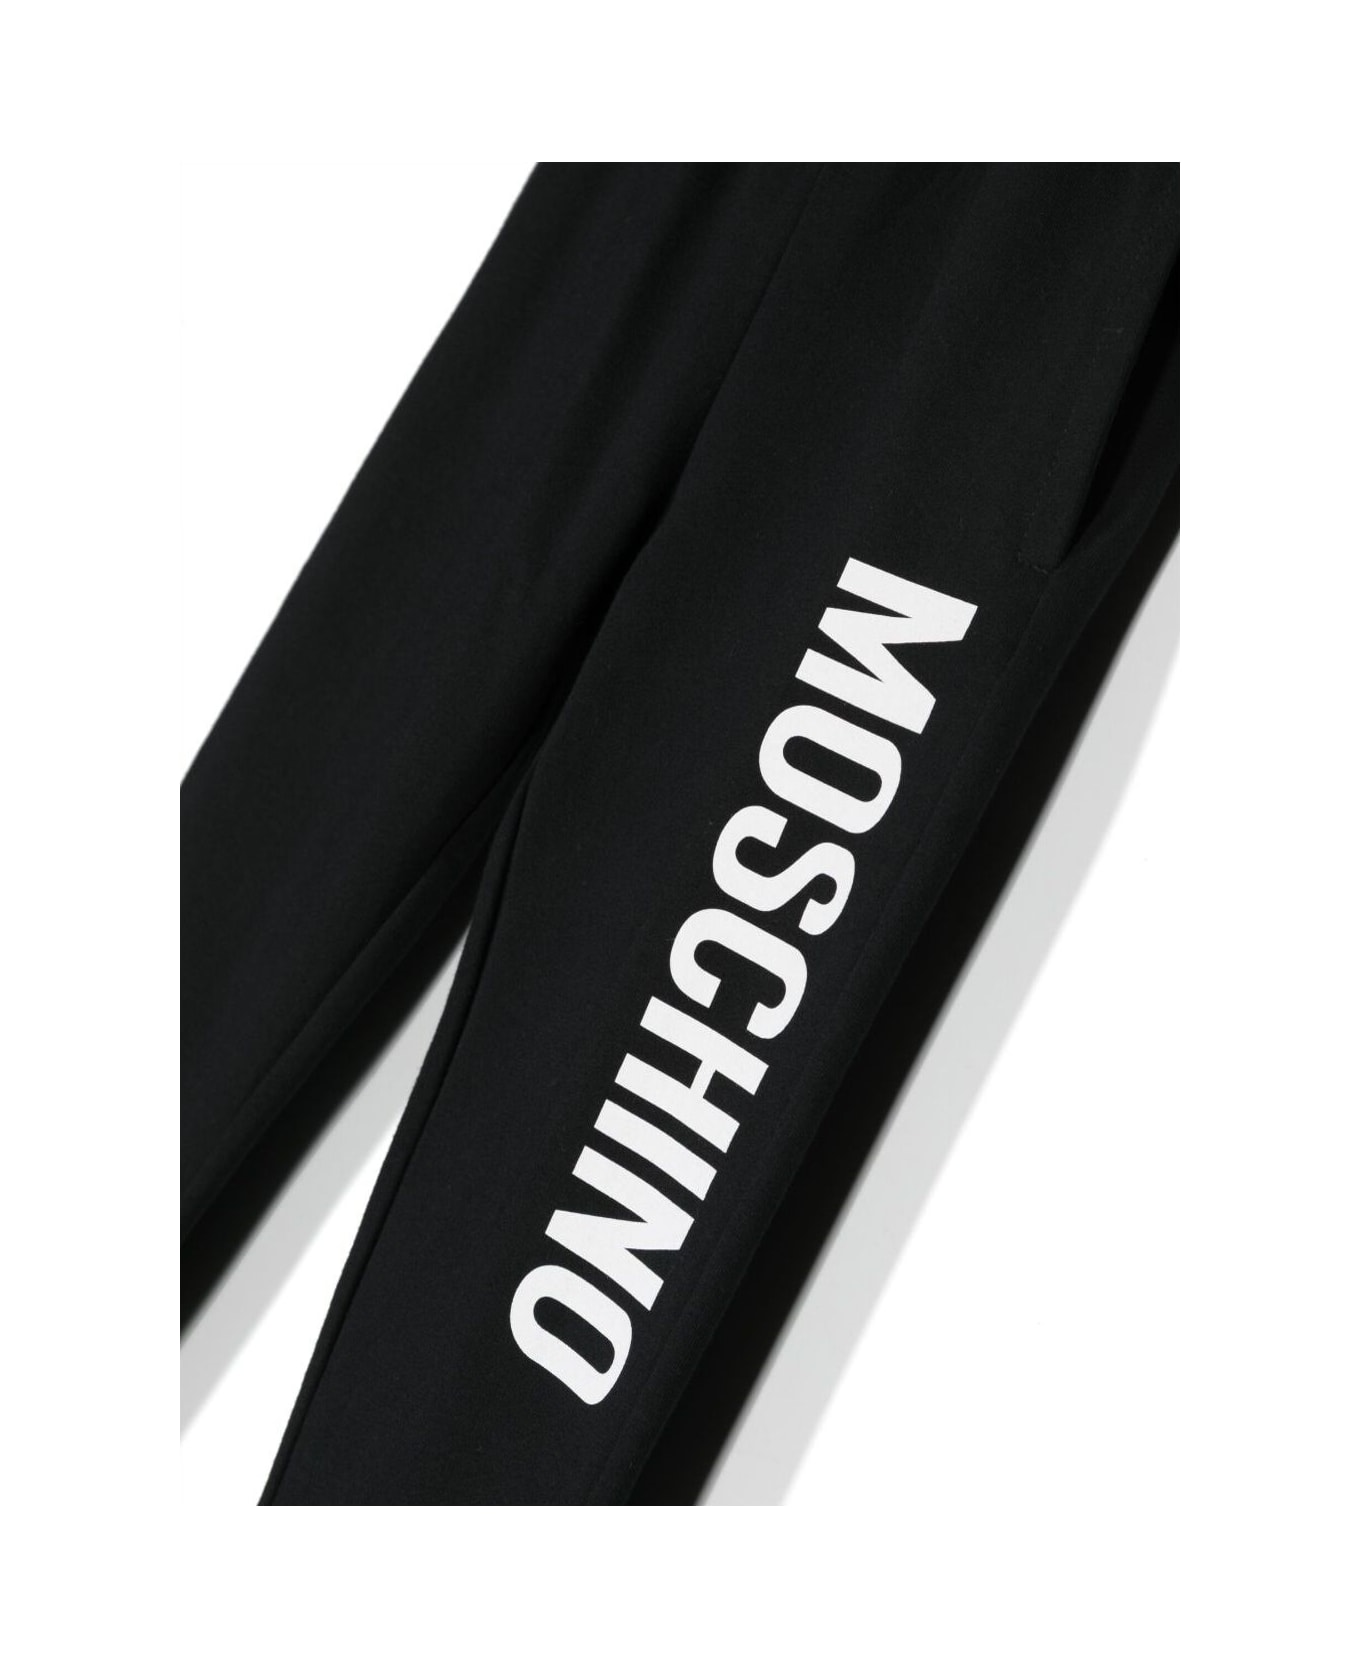 Moschino Black Track Pants And Contrasting Maxi Logo In Stretch Cotton Boy - Black ボトムス